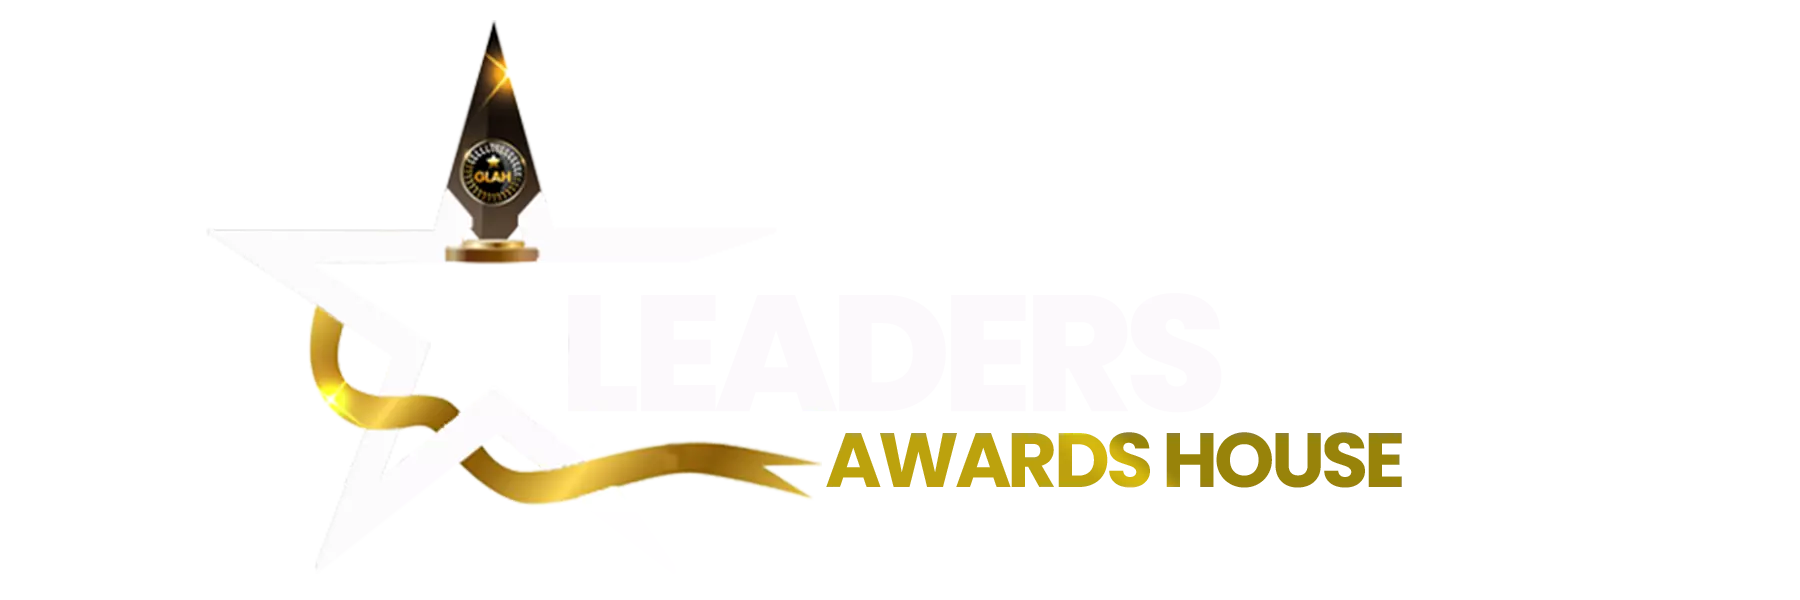 Global Leaders Awards House official